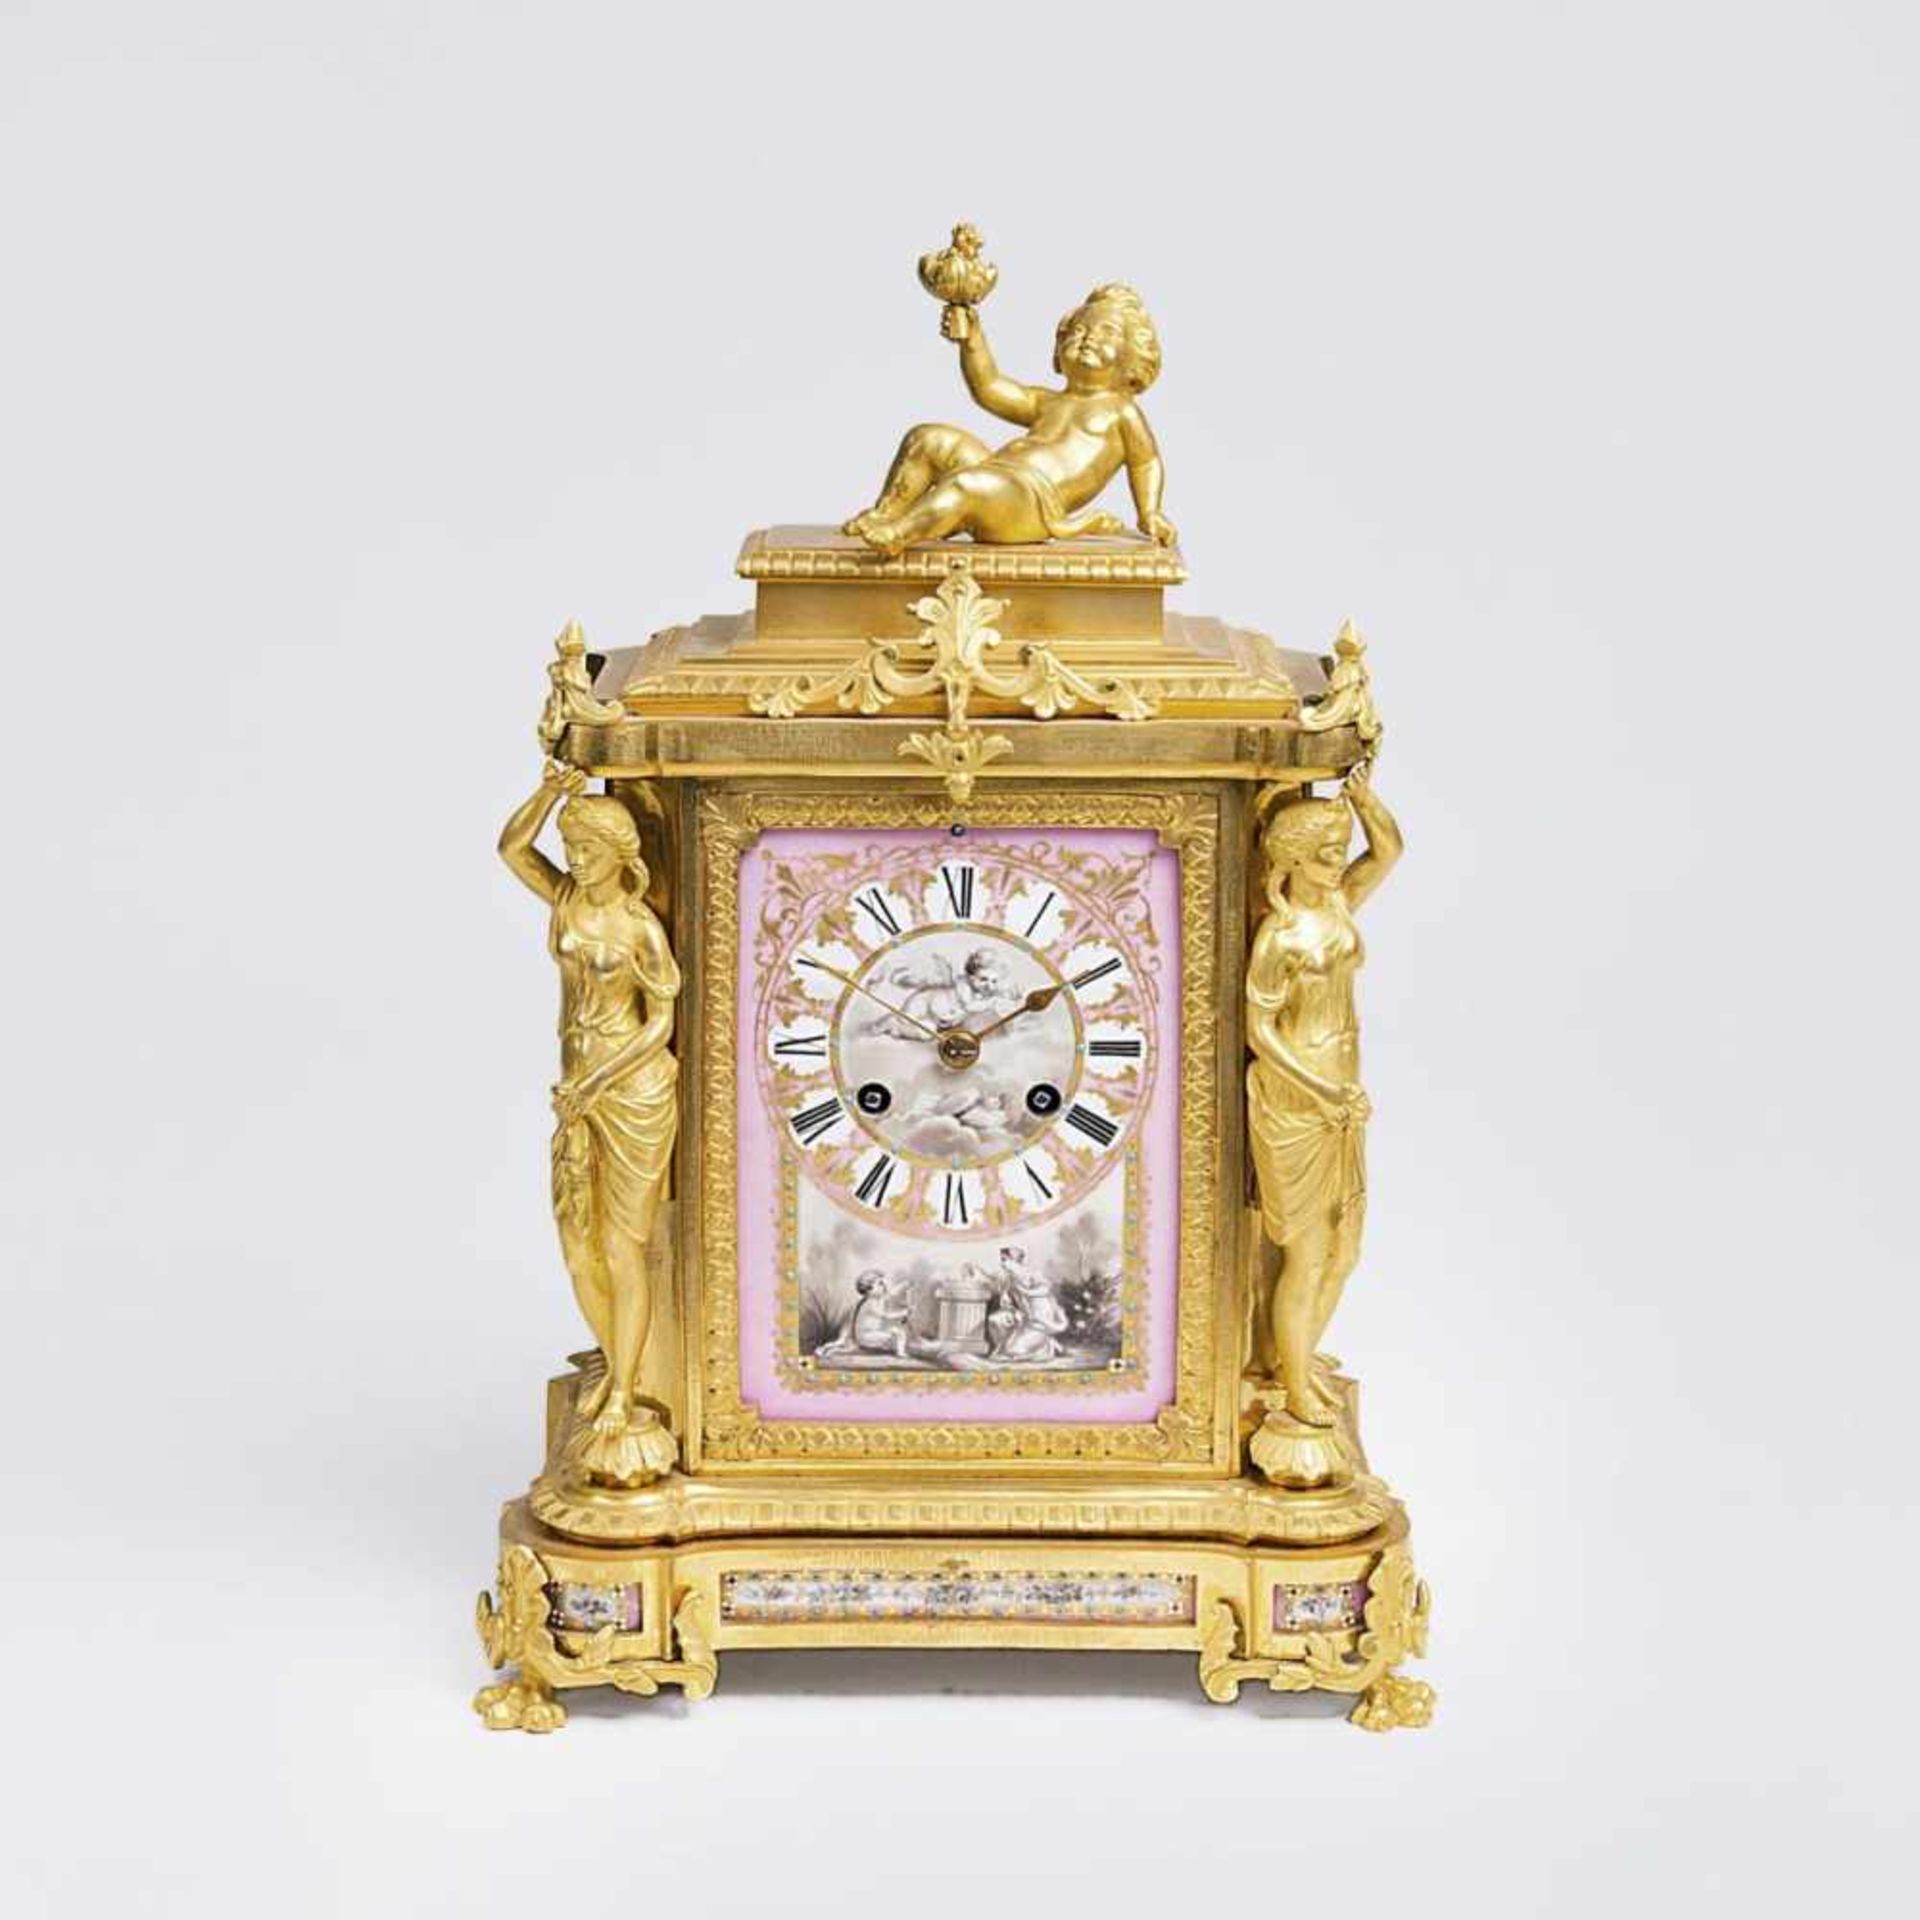 A Napoléon III Pendule with Caryatids and Sèvres Porcelain Plates 'Requiem'France, around 1870/80.